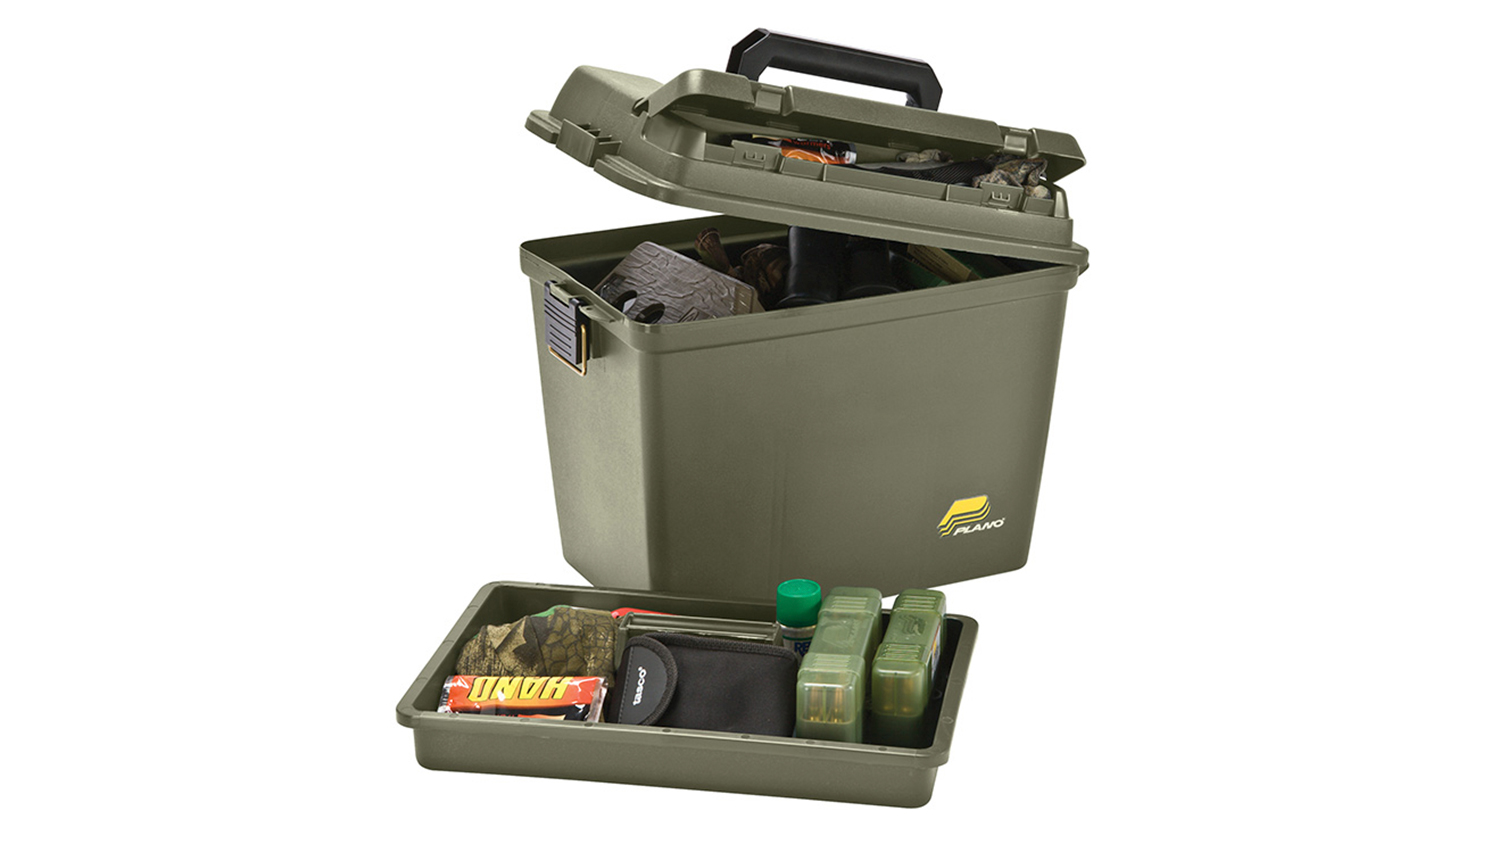 New Plano 1812 Magnum Ammo Box  An NRA Shooting Sports Journal